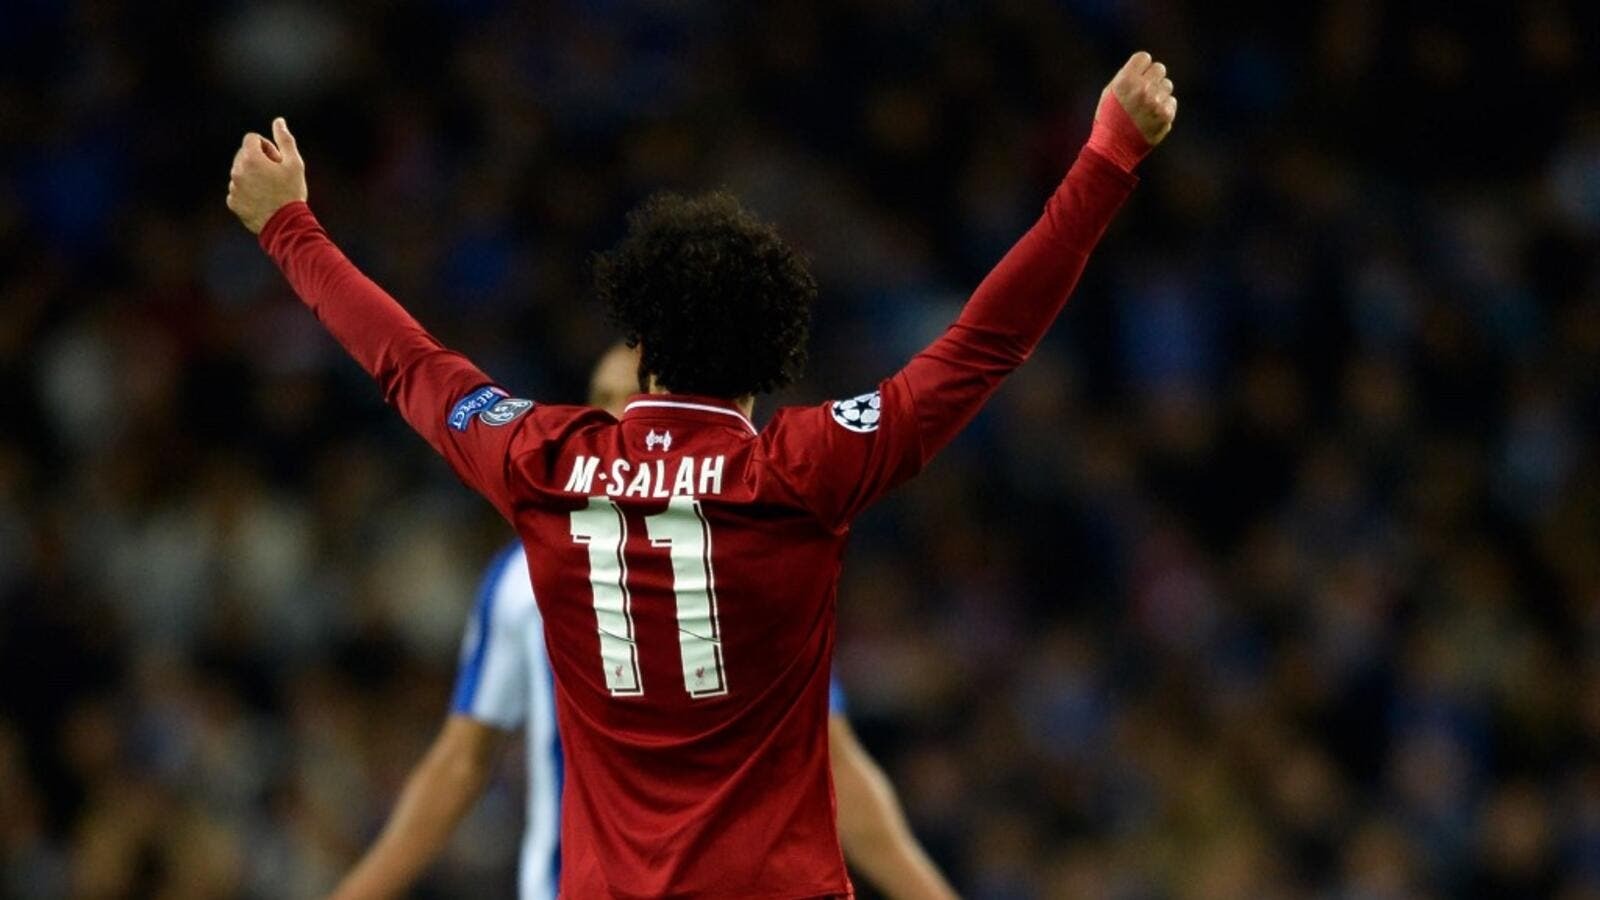 Mohamed Salah said he come to win the Premier League, after their resounding 4-0 victory